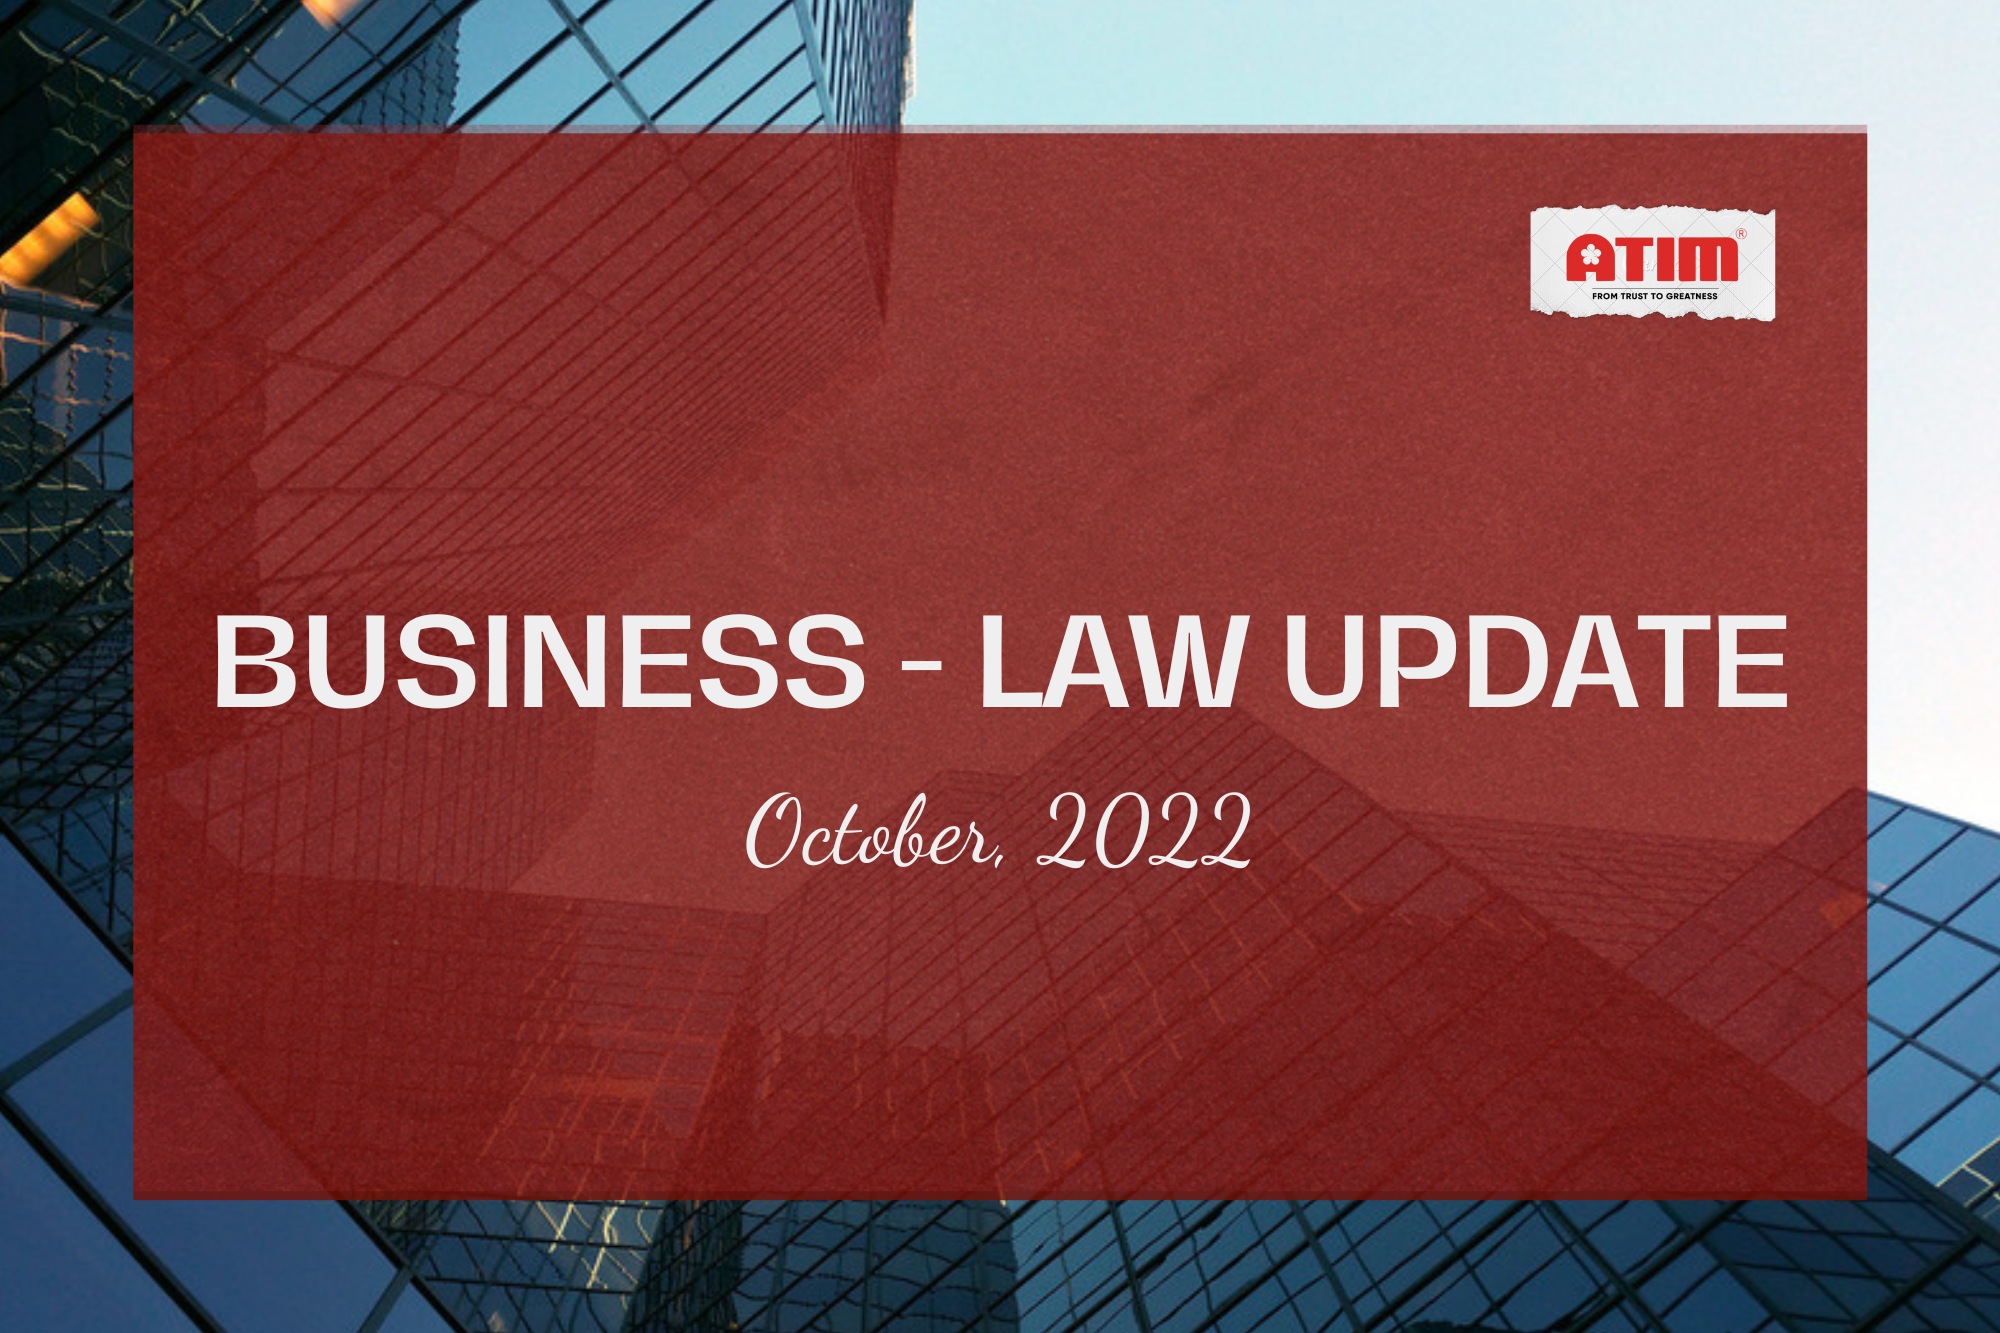 BUSINESS - LAW UPDATE – OCTOBER 2022